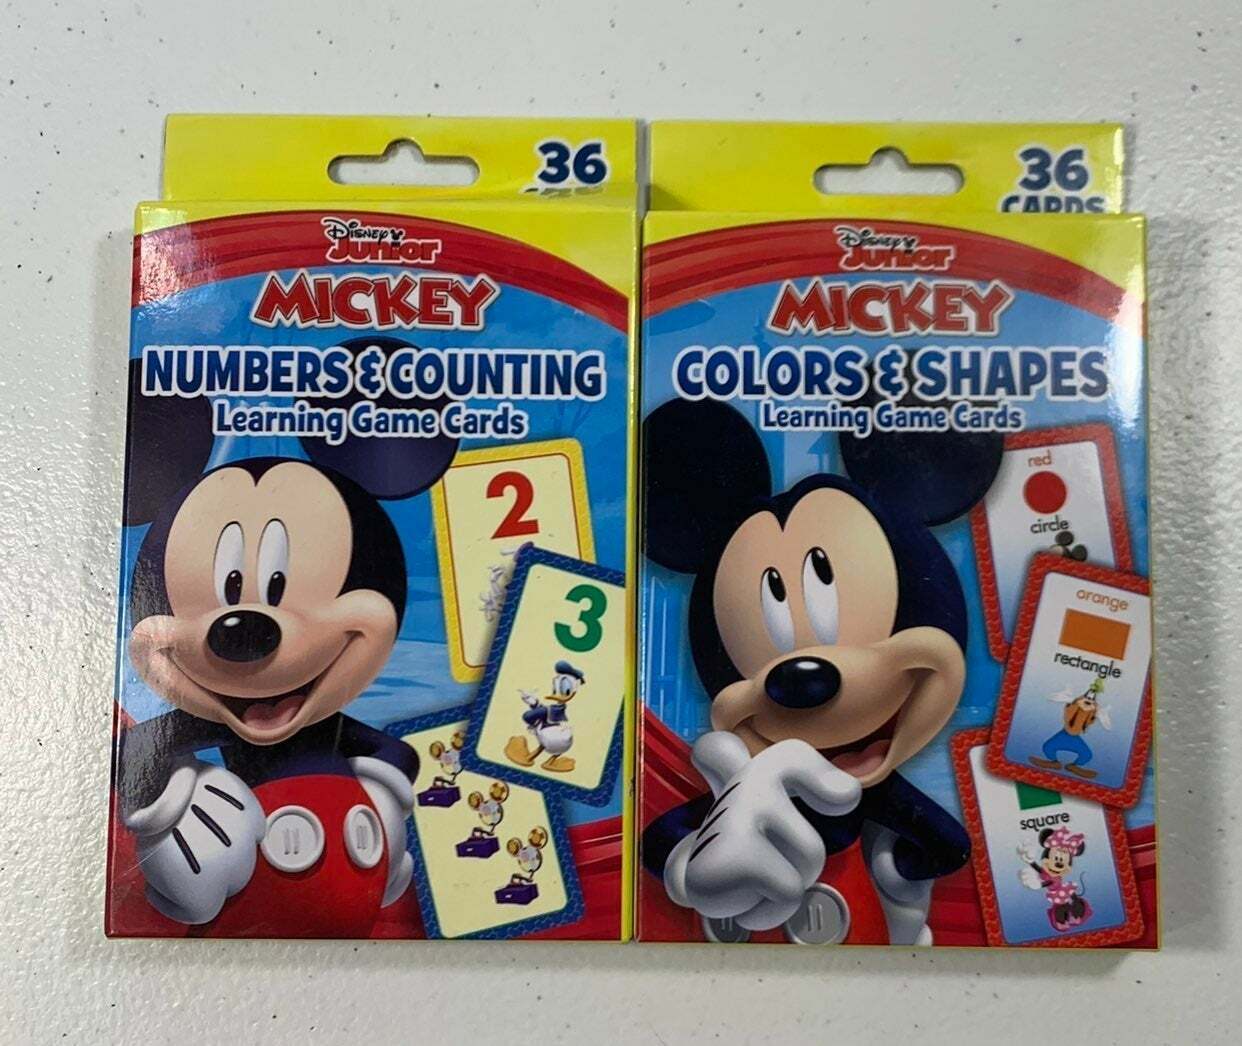 DISNEY MICKEY GAME LEARNING CARDS AUTISM SPECIAL NEEDS NUMBERS COLORS SHAPES KID Bendon DISNEY MICKEY MOUSE